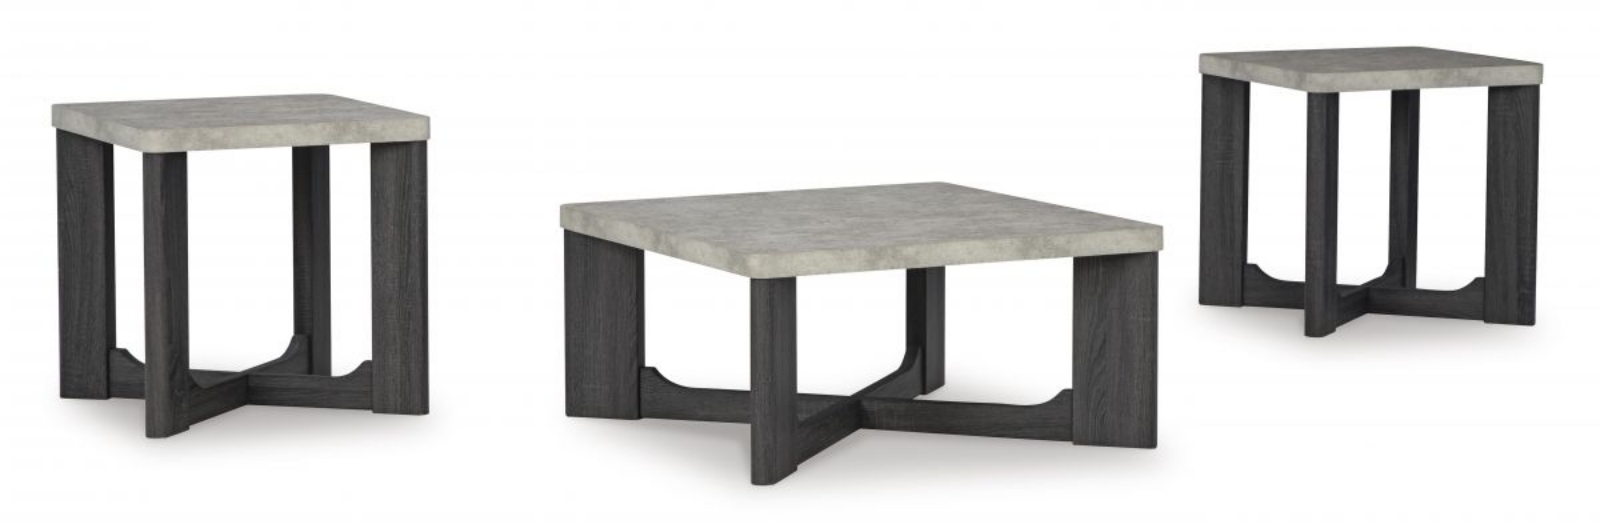 Picture of Sharstorm 3 Piece Table Set